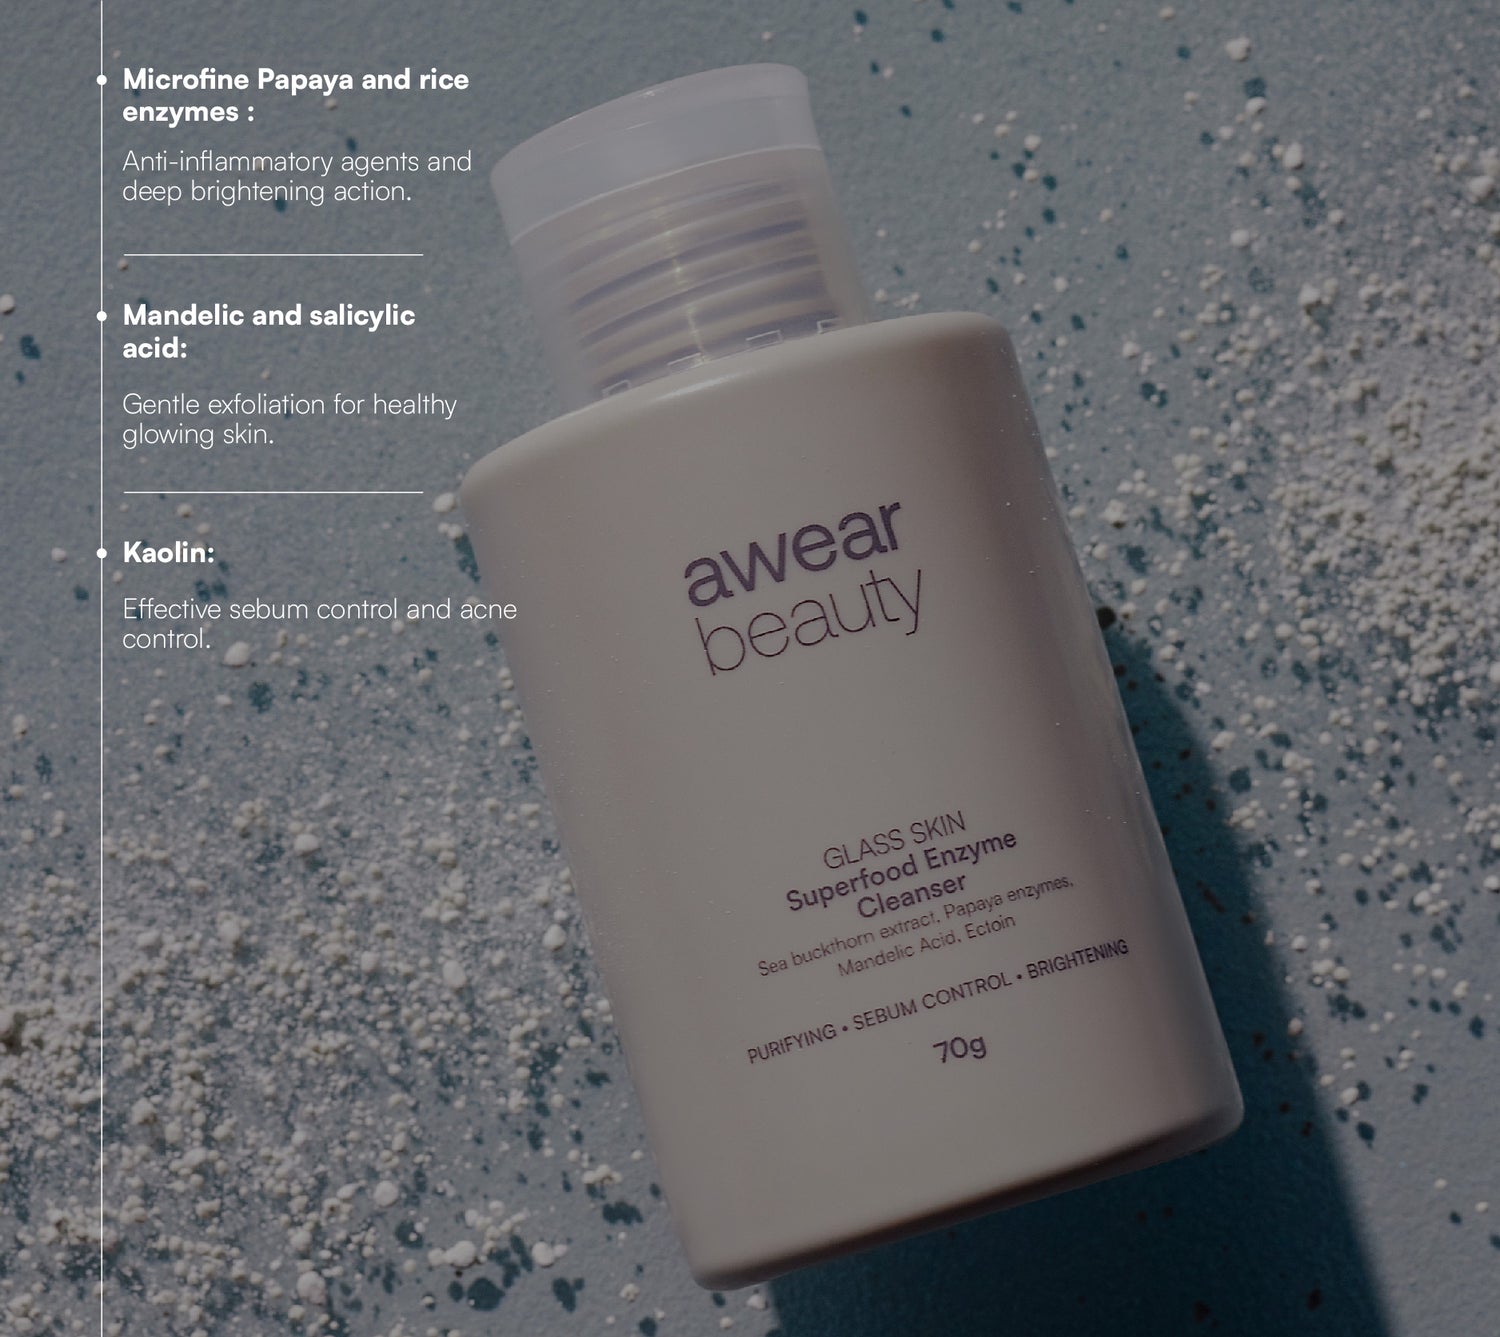 Superfood Enzyme Cleanser + Dual Spot Treatment Serum